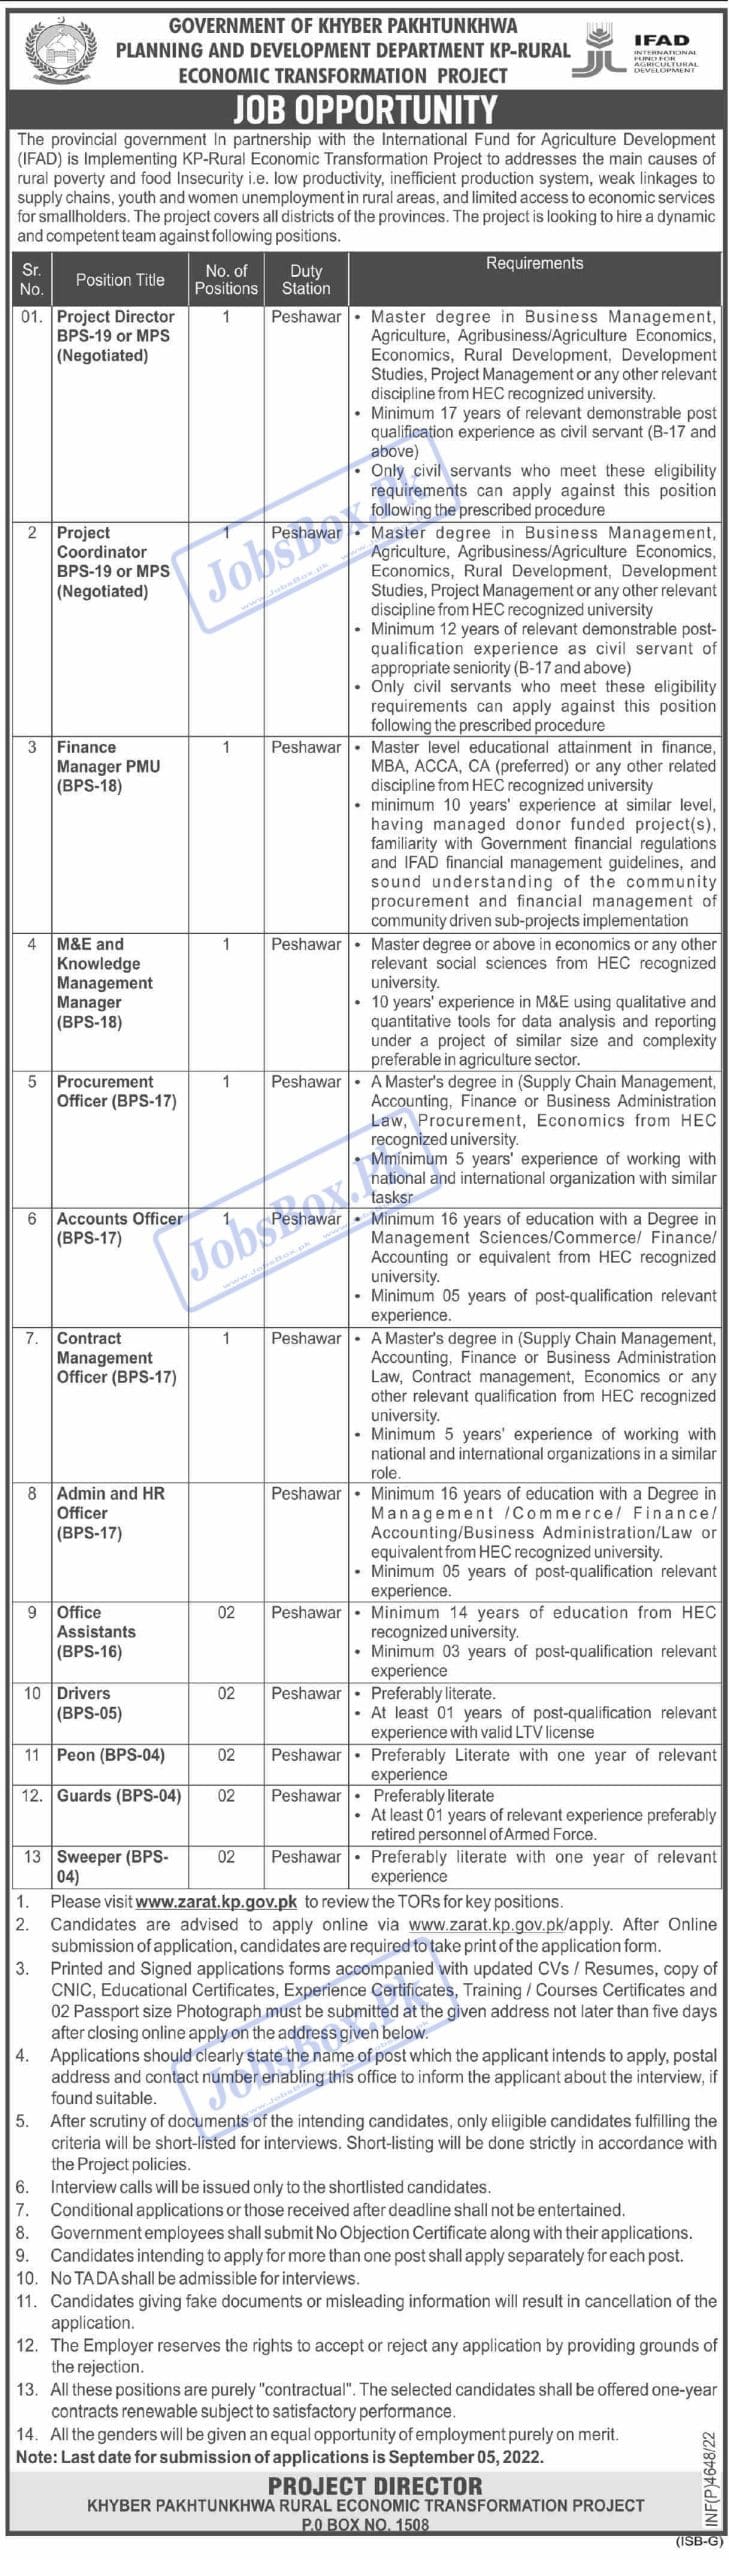 New Govt Jobs in KPK Planning and Development Department Latest Jobs for driver